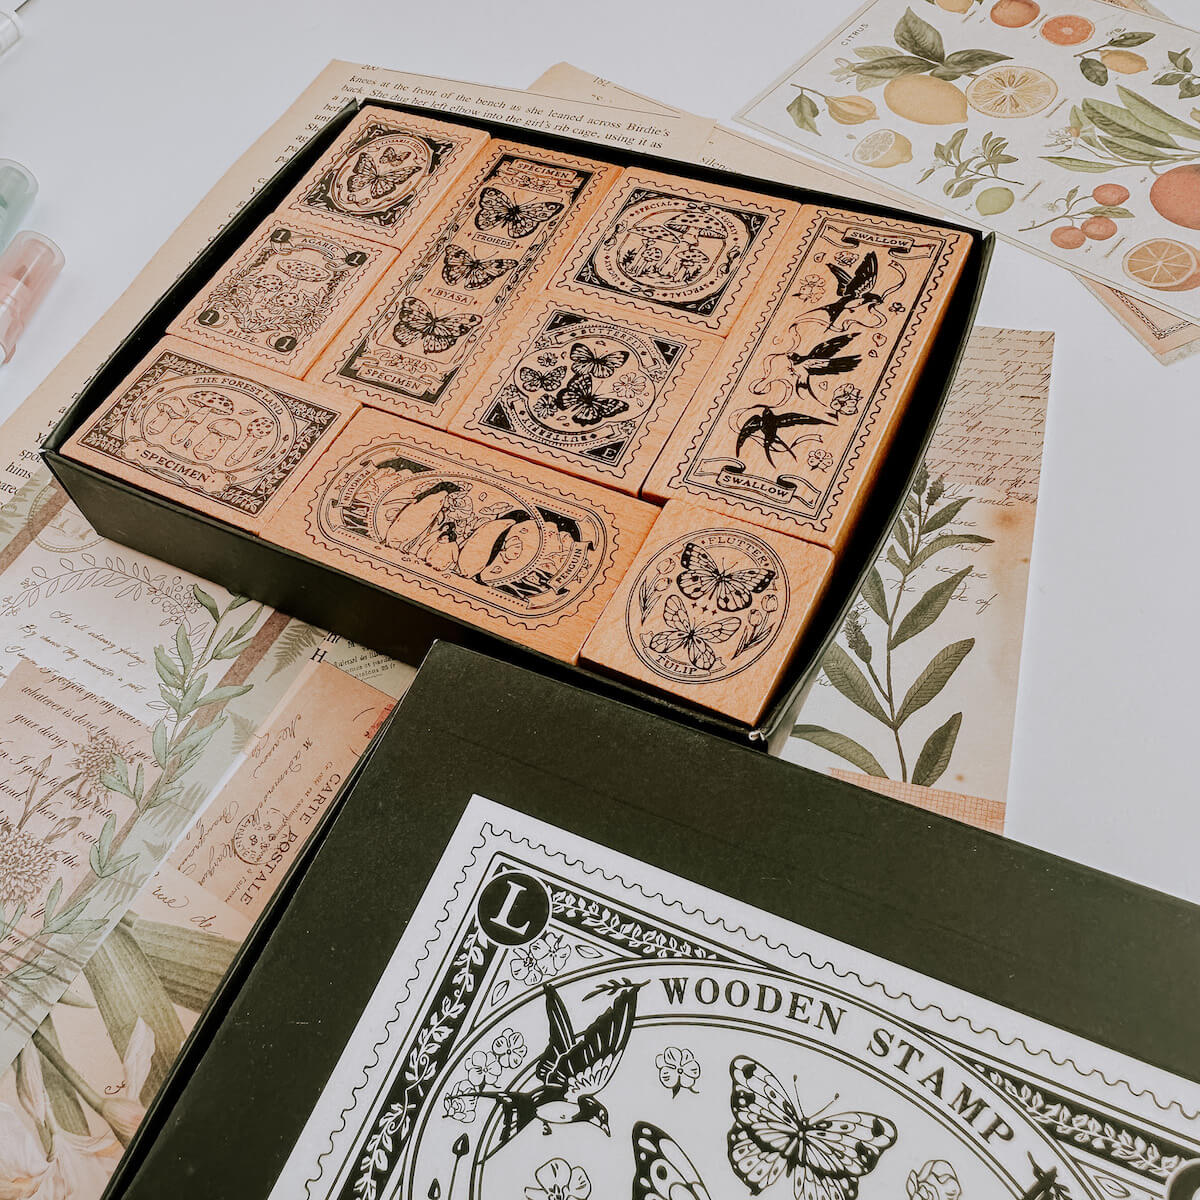 Wooden stamp set with butterflies, penguins and mushroom designs